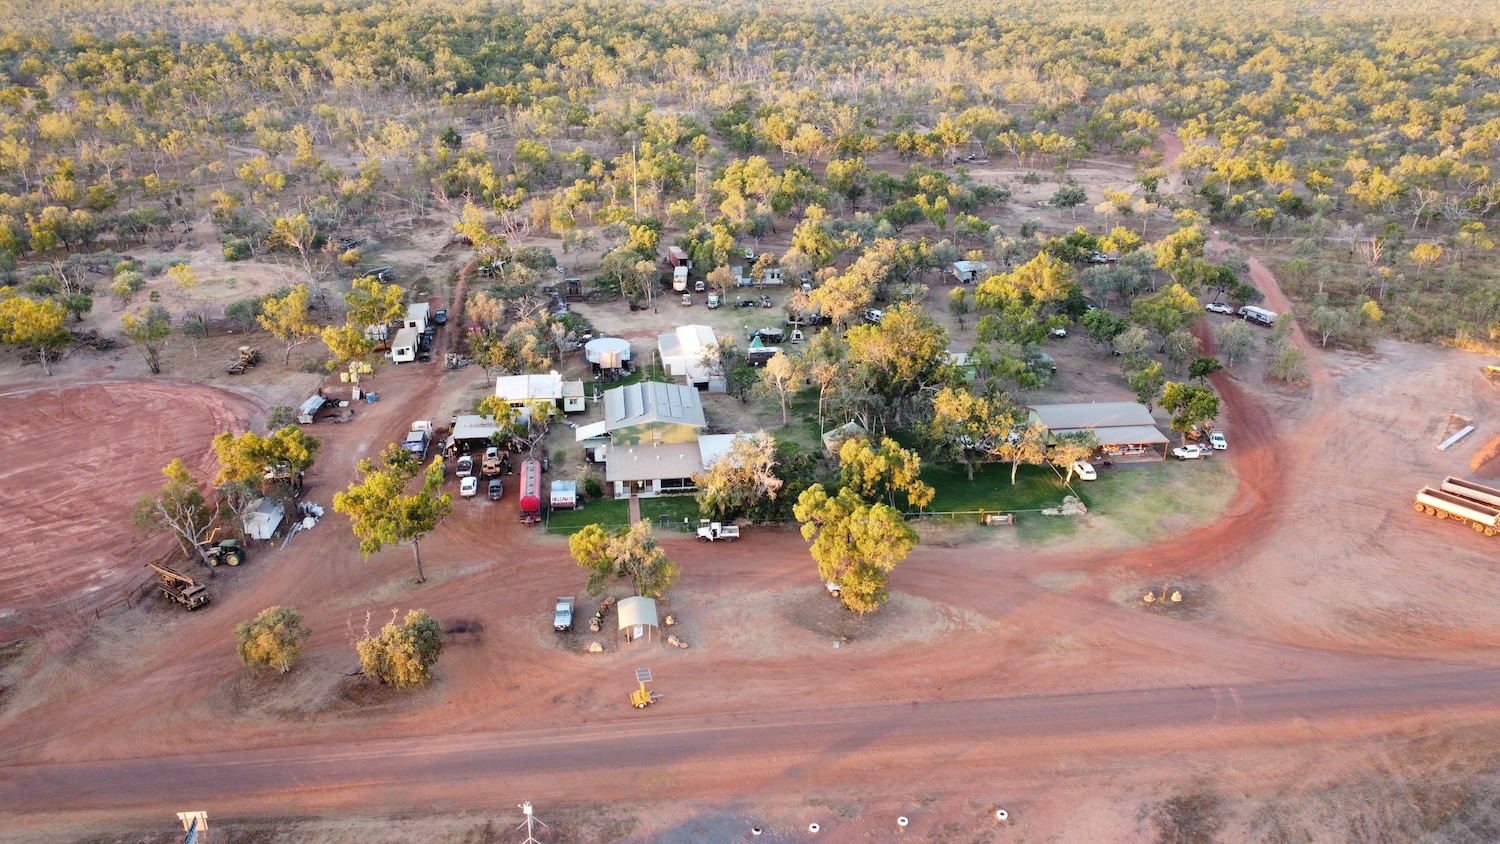 Hell's Gate Roadhouse view from helicopter